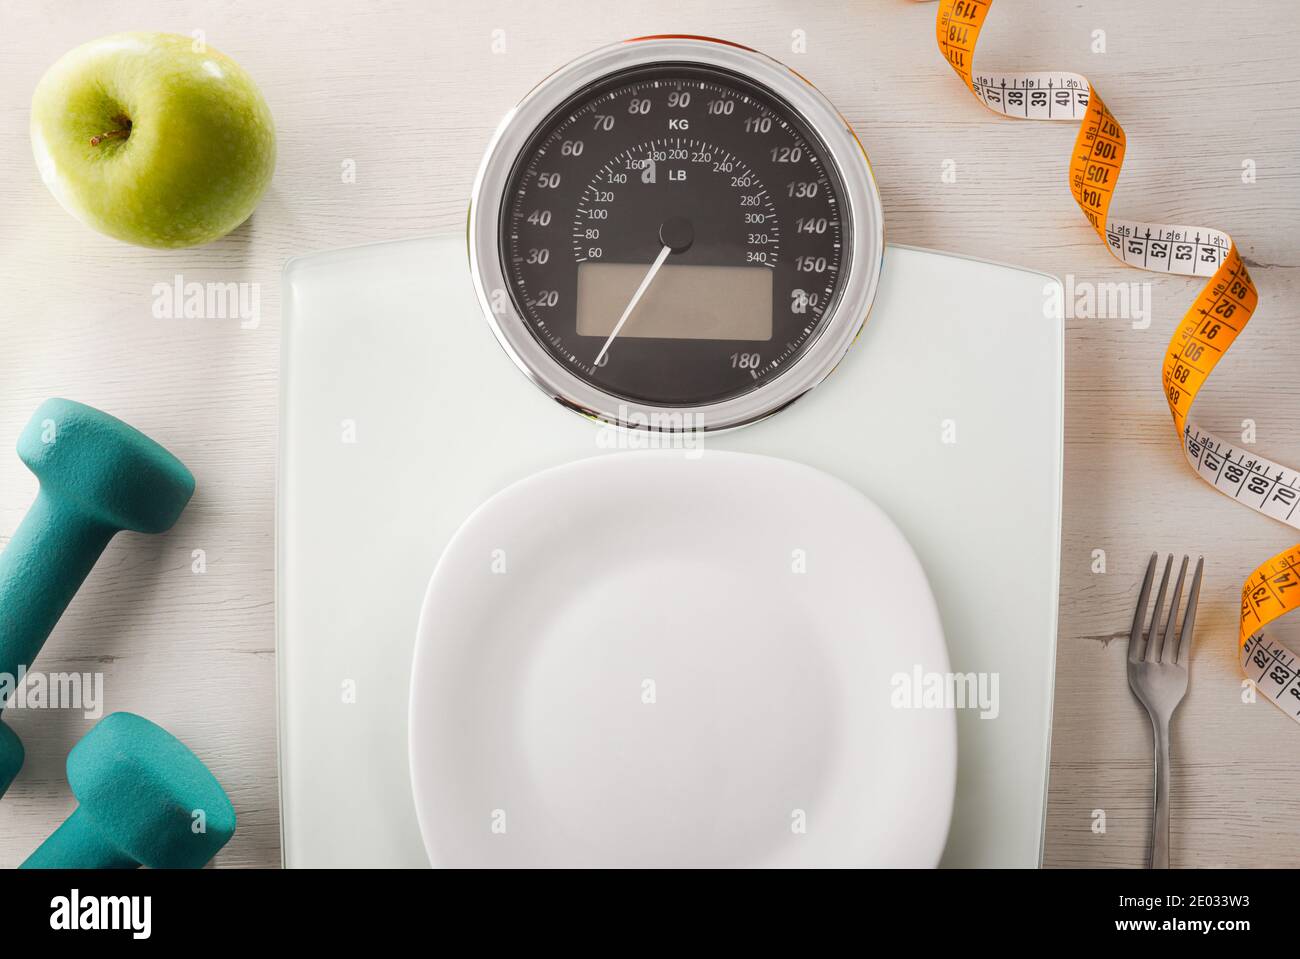 Weight control concept with plate on scale and cutlery apple and dumbbells on white wooden table. Top view. Horizontal composition. Stock Photo